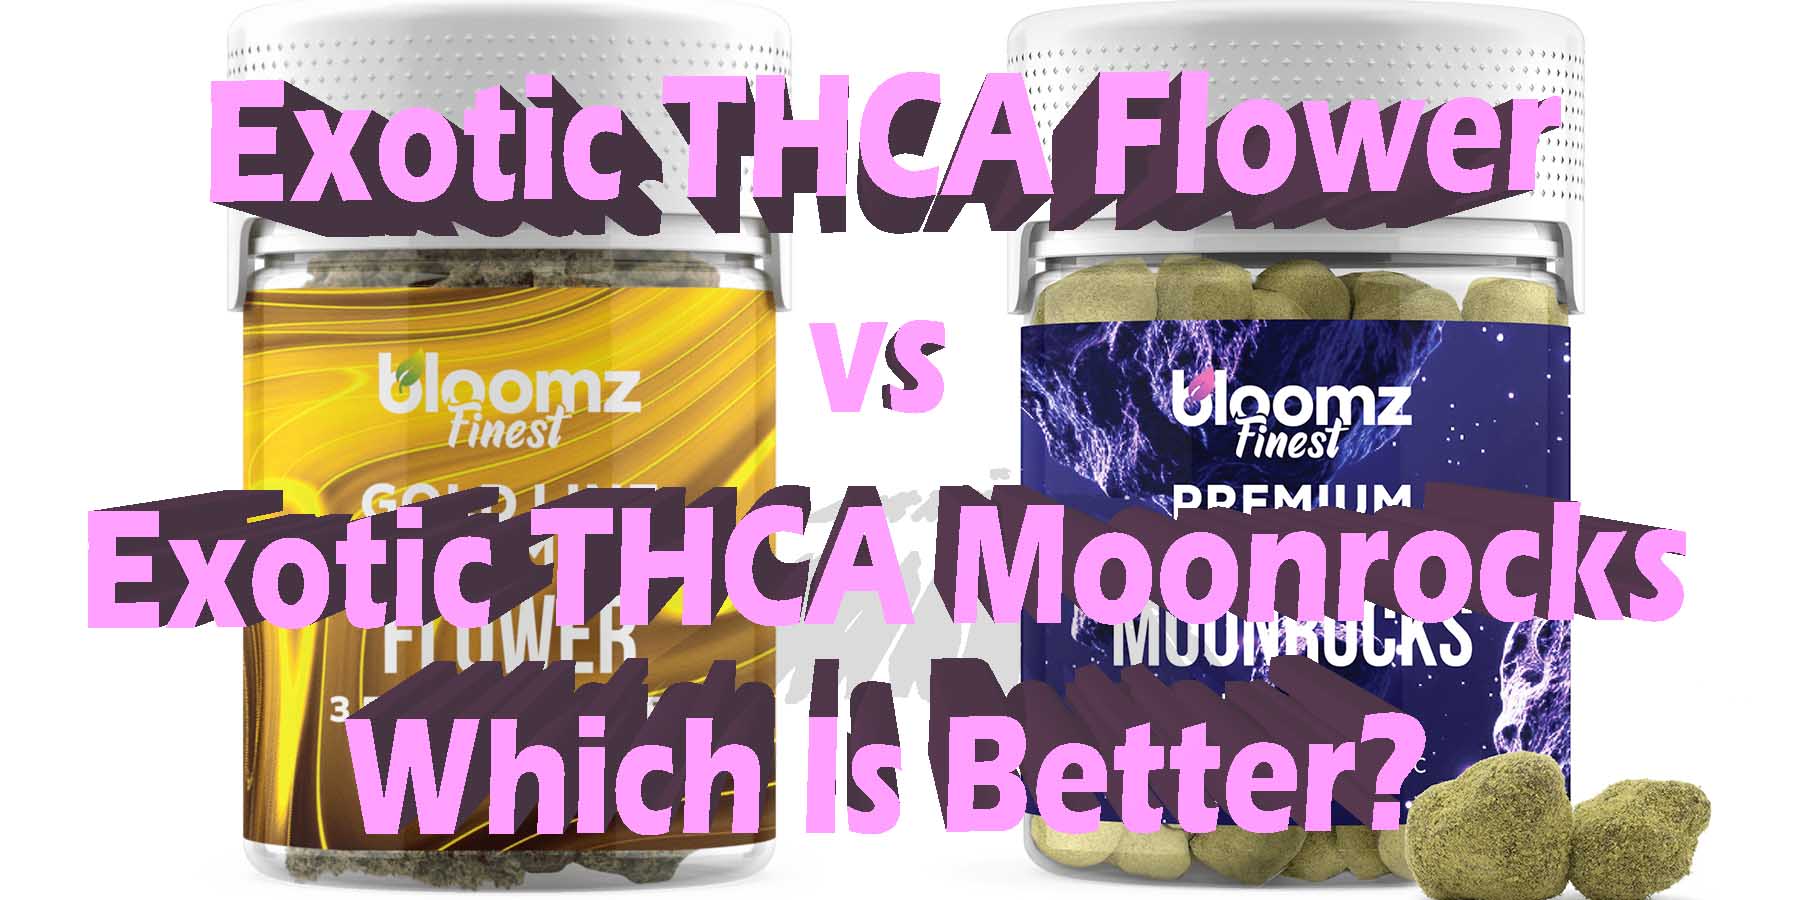 Exotic THCA Flower vs Exotic THCA Moonrocks Which Is Better Which Is Better HowToGetNearMe BestPlace LowestPrice Coupon Discount For Smoking Best High Binod